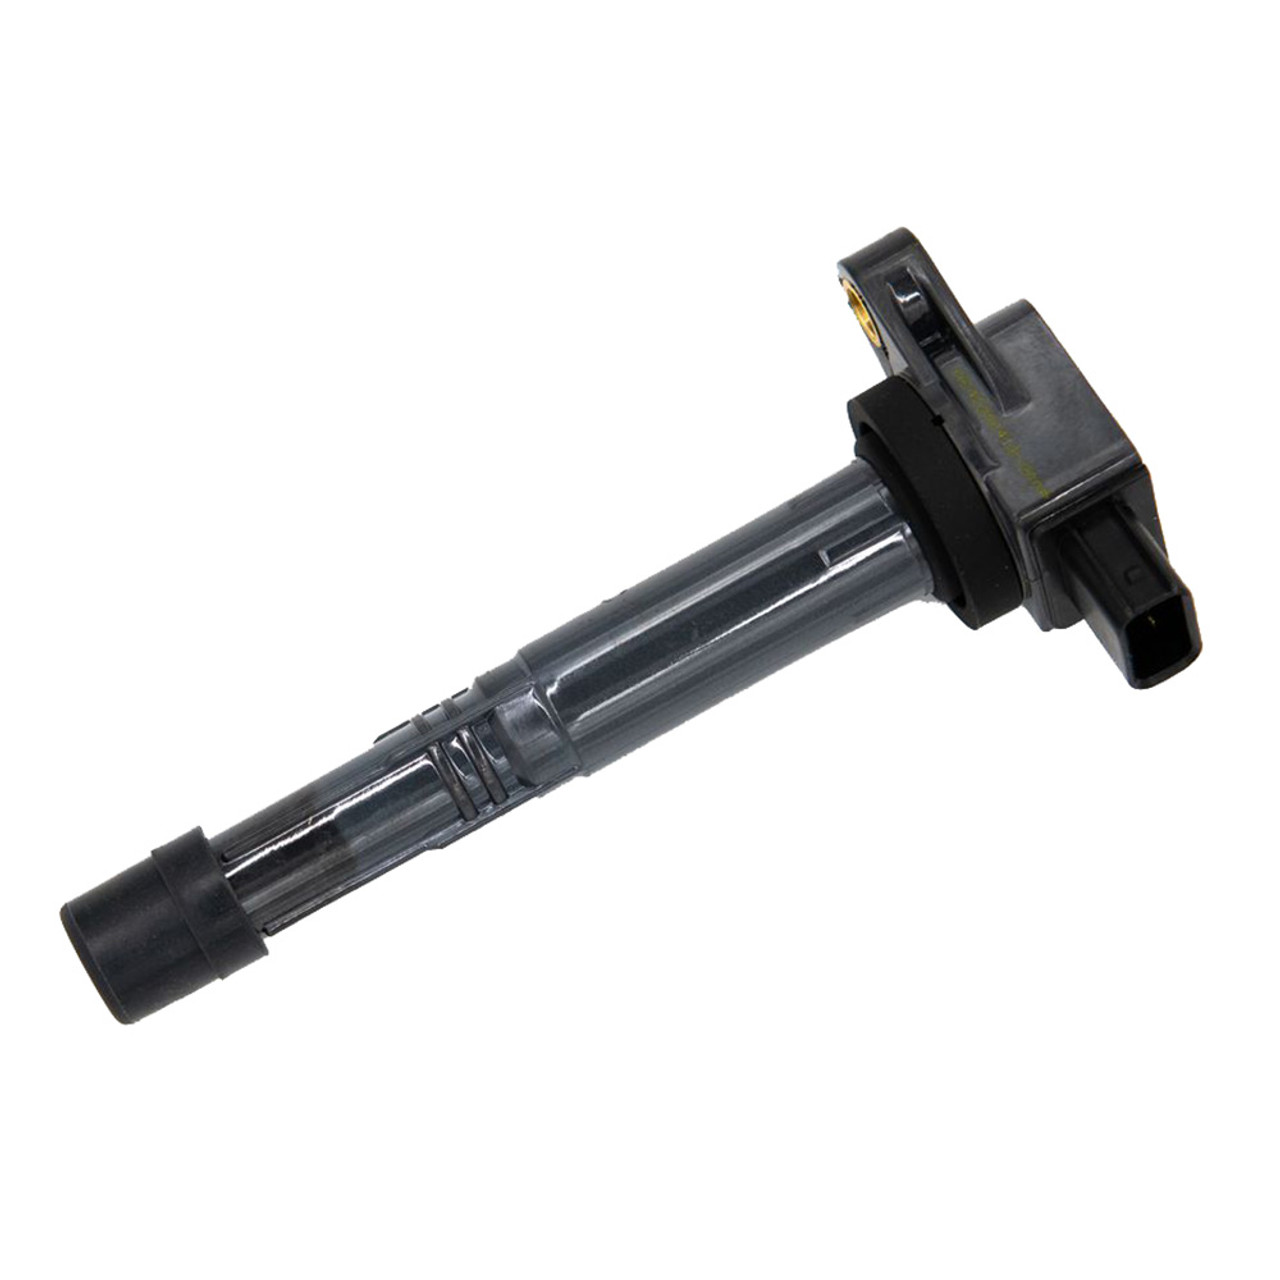 ARCO Marine Premium Replacement Ignition Coil f\/Honda Outboard Engines 2004-2007 [IG009]